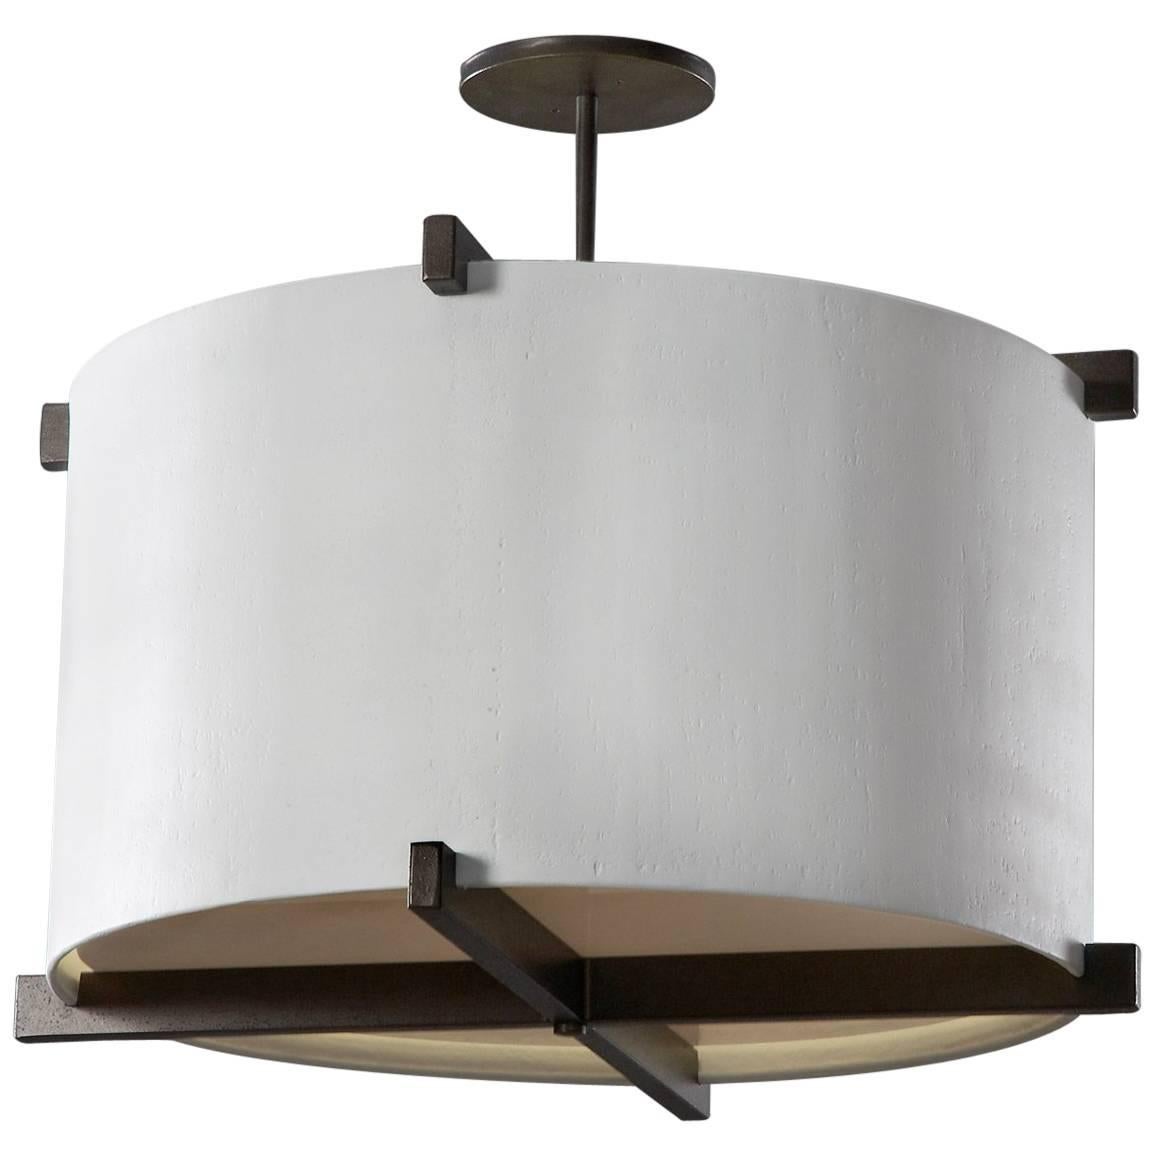 Plaster of Paris shade inserted in a bronze patina frame
White plexiglass diffuser. The light provides a soft down light and a warm ambient light which reflects off the ceiling. Light uses two medium bulbs. Max wattage 200 watts. Chandelier is made